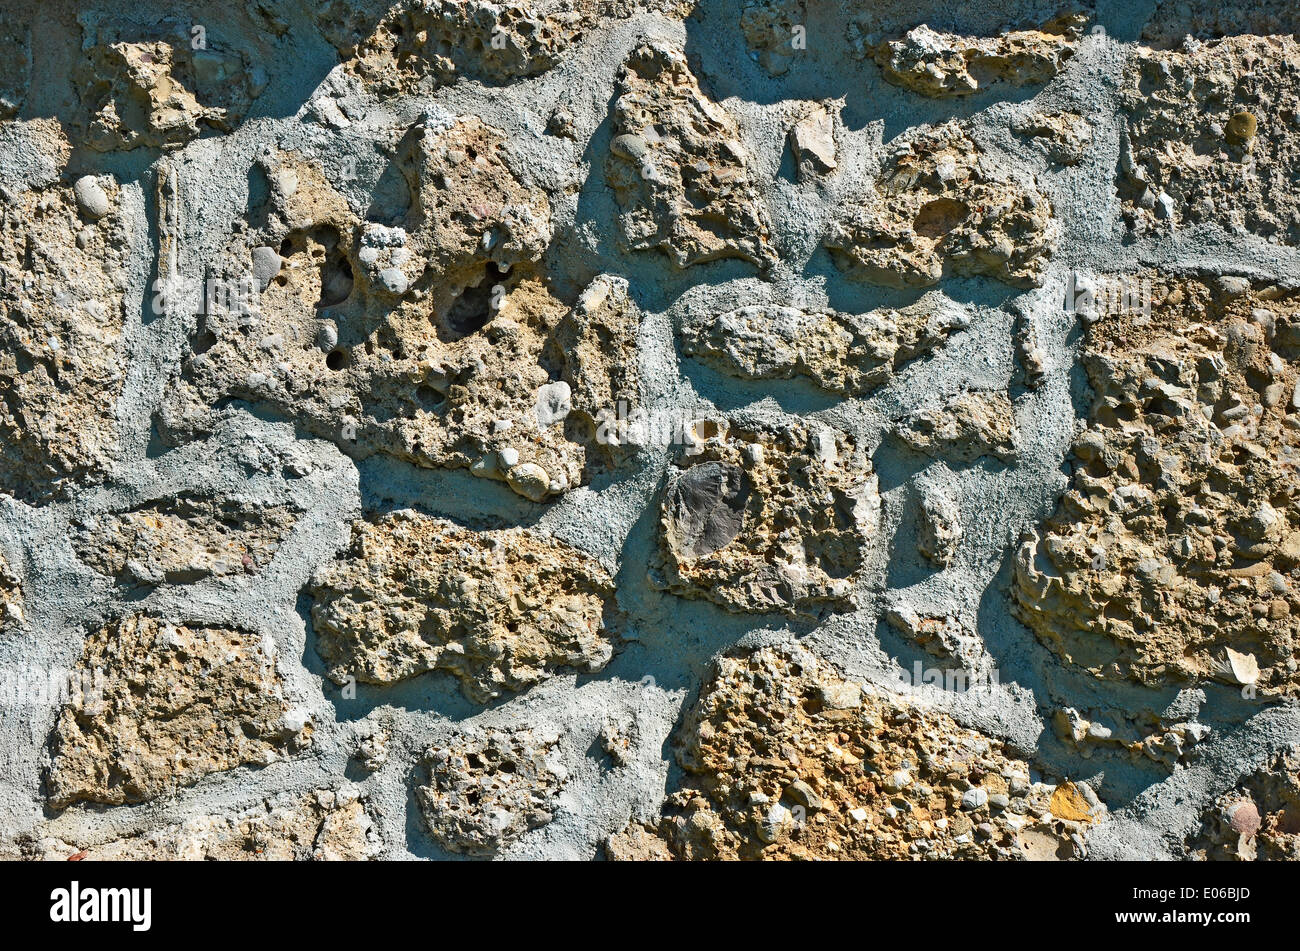 Masonry - Old stone wall structure from individual units laid in and bound together by mortar. Stock Photo